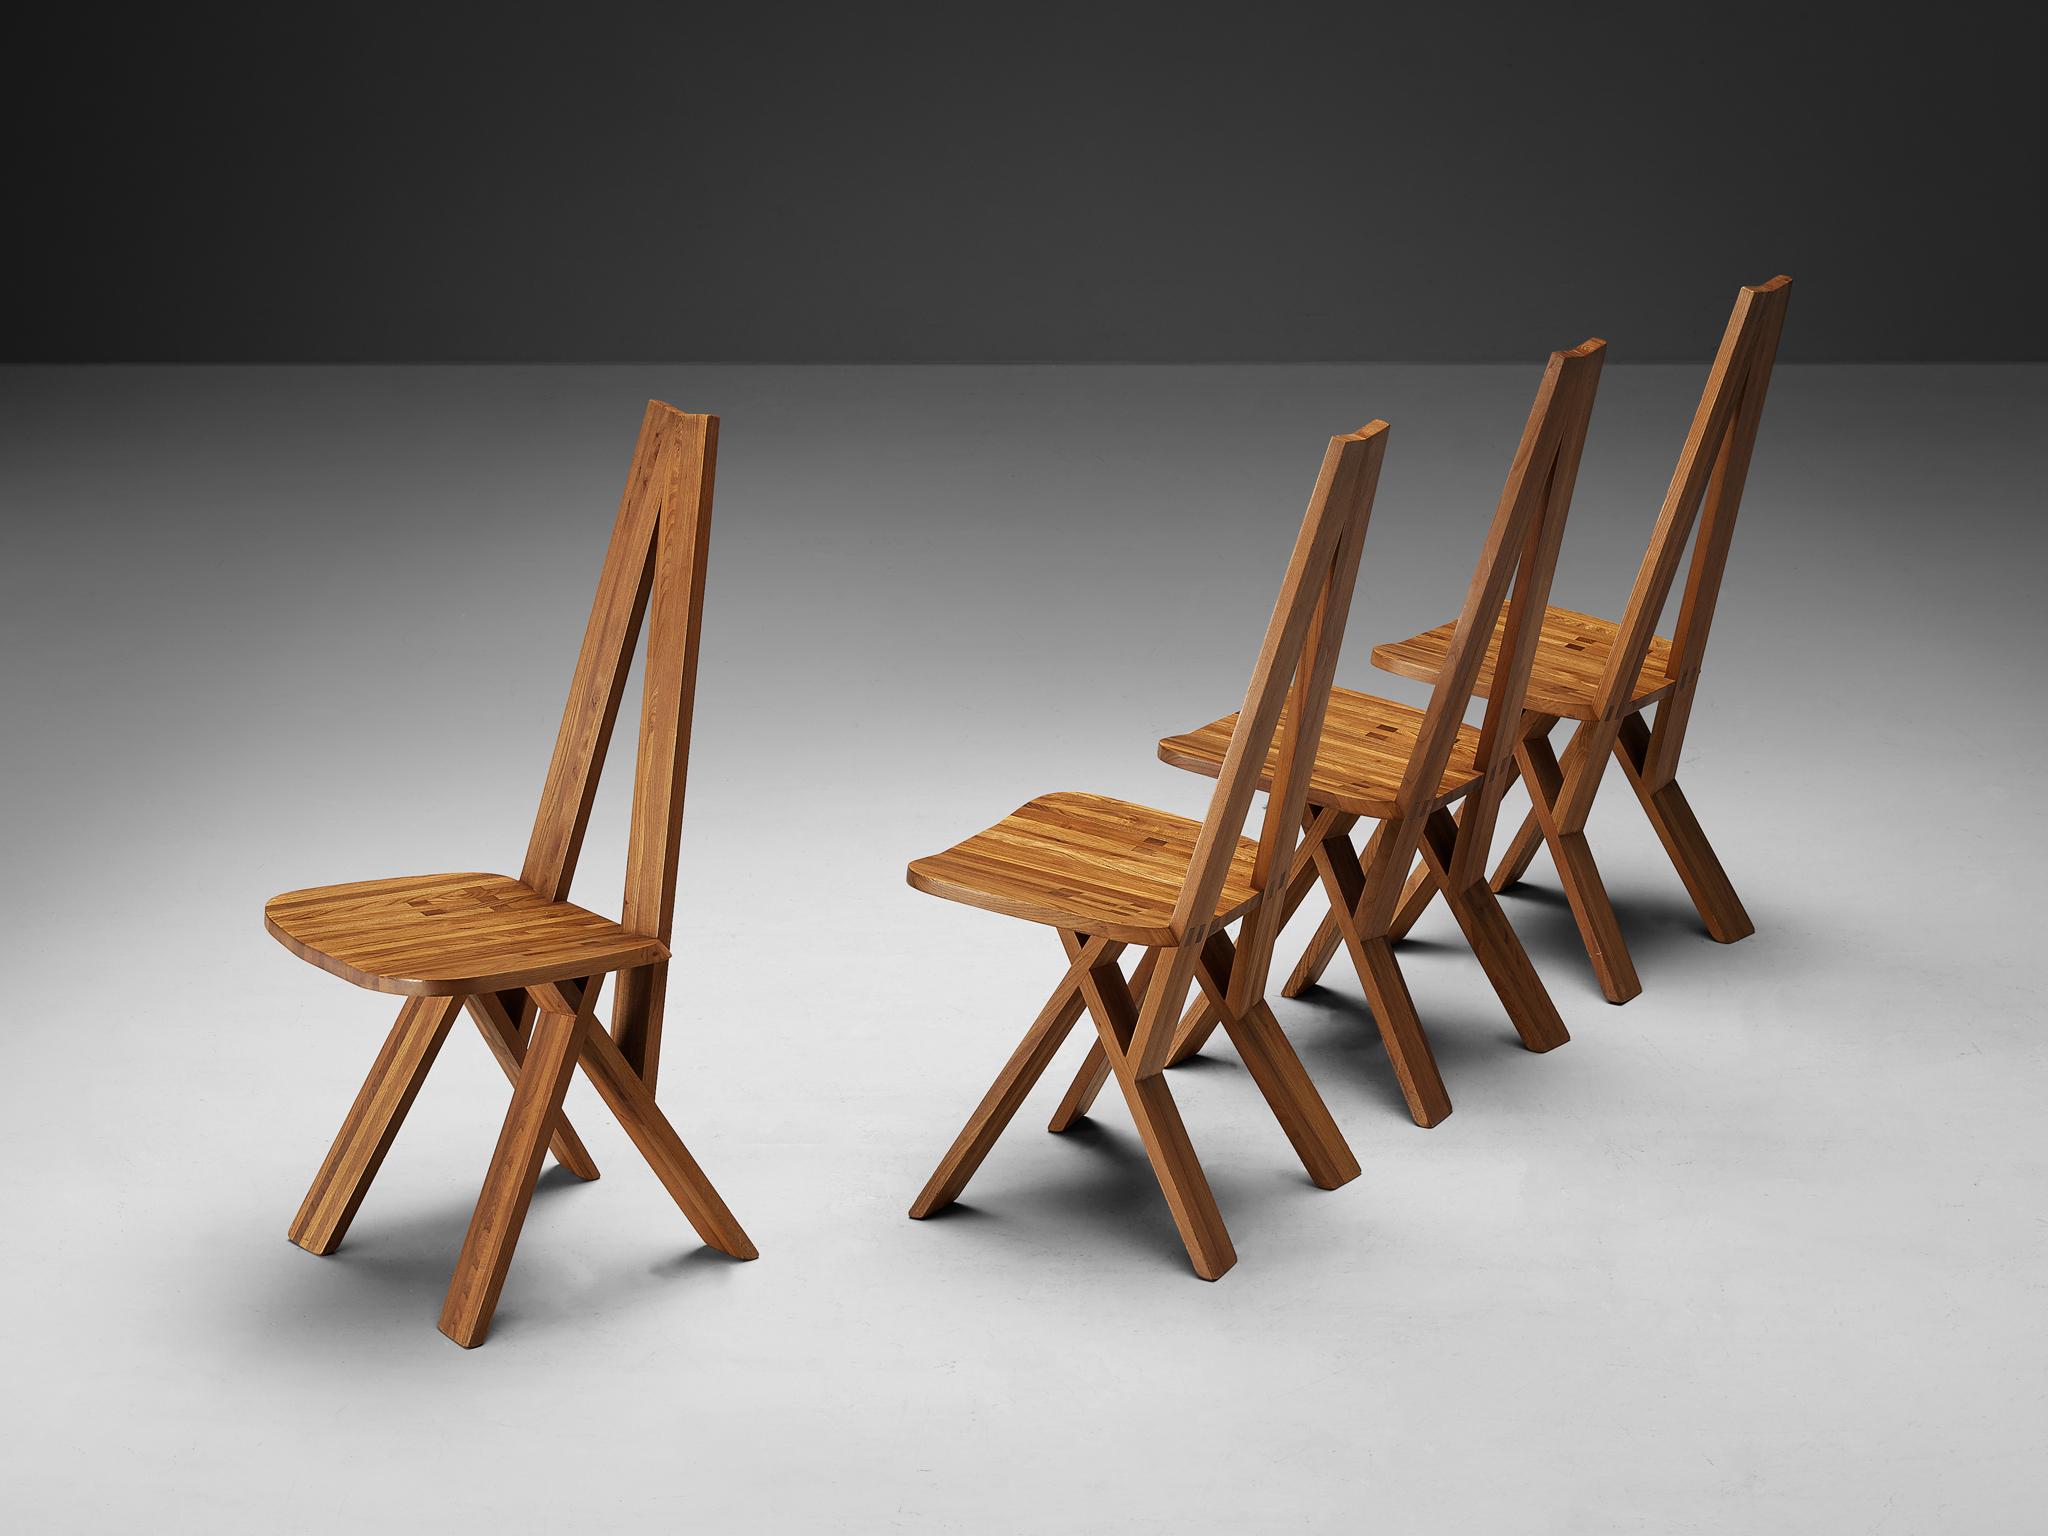 Pierre Chapo, set of four 'S45' or 'Chlacc' dining chairs, solid elm, France, 1979

These S45 chairs, also known as Chlacc, are one of the early editions designed by Pierre Chapo, known for his hallmark use of solid elmwood and a commitment to pure